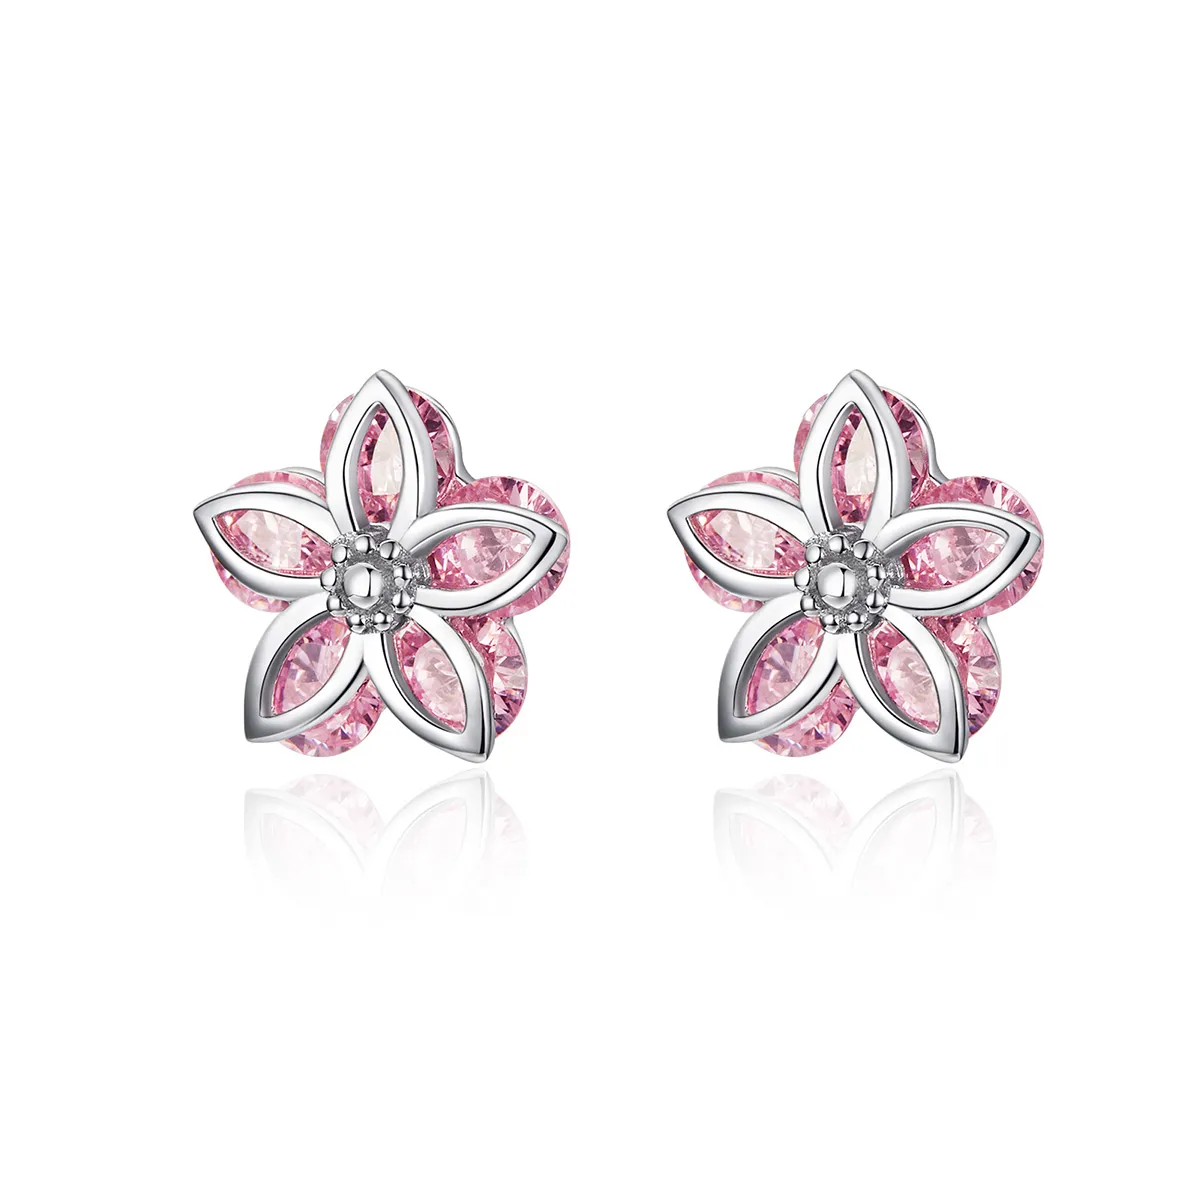 Pandora Style Silver Cherry Blossoms Stud Earrings - SCE644